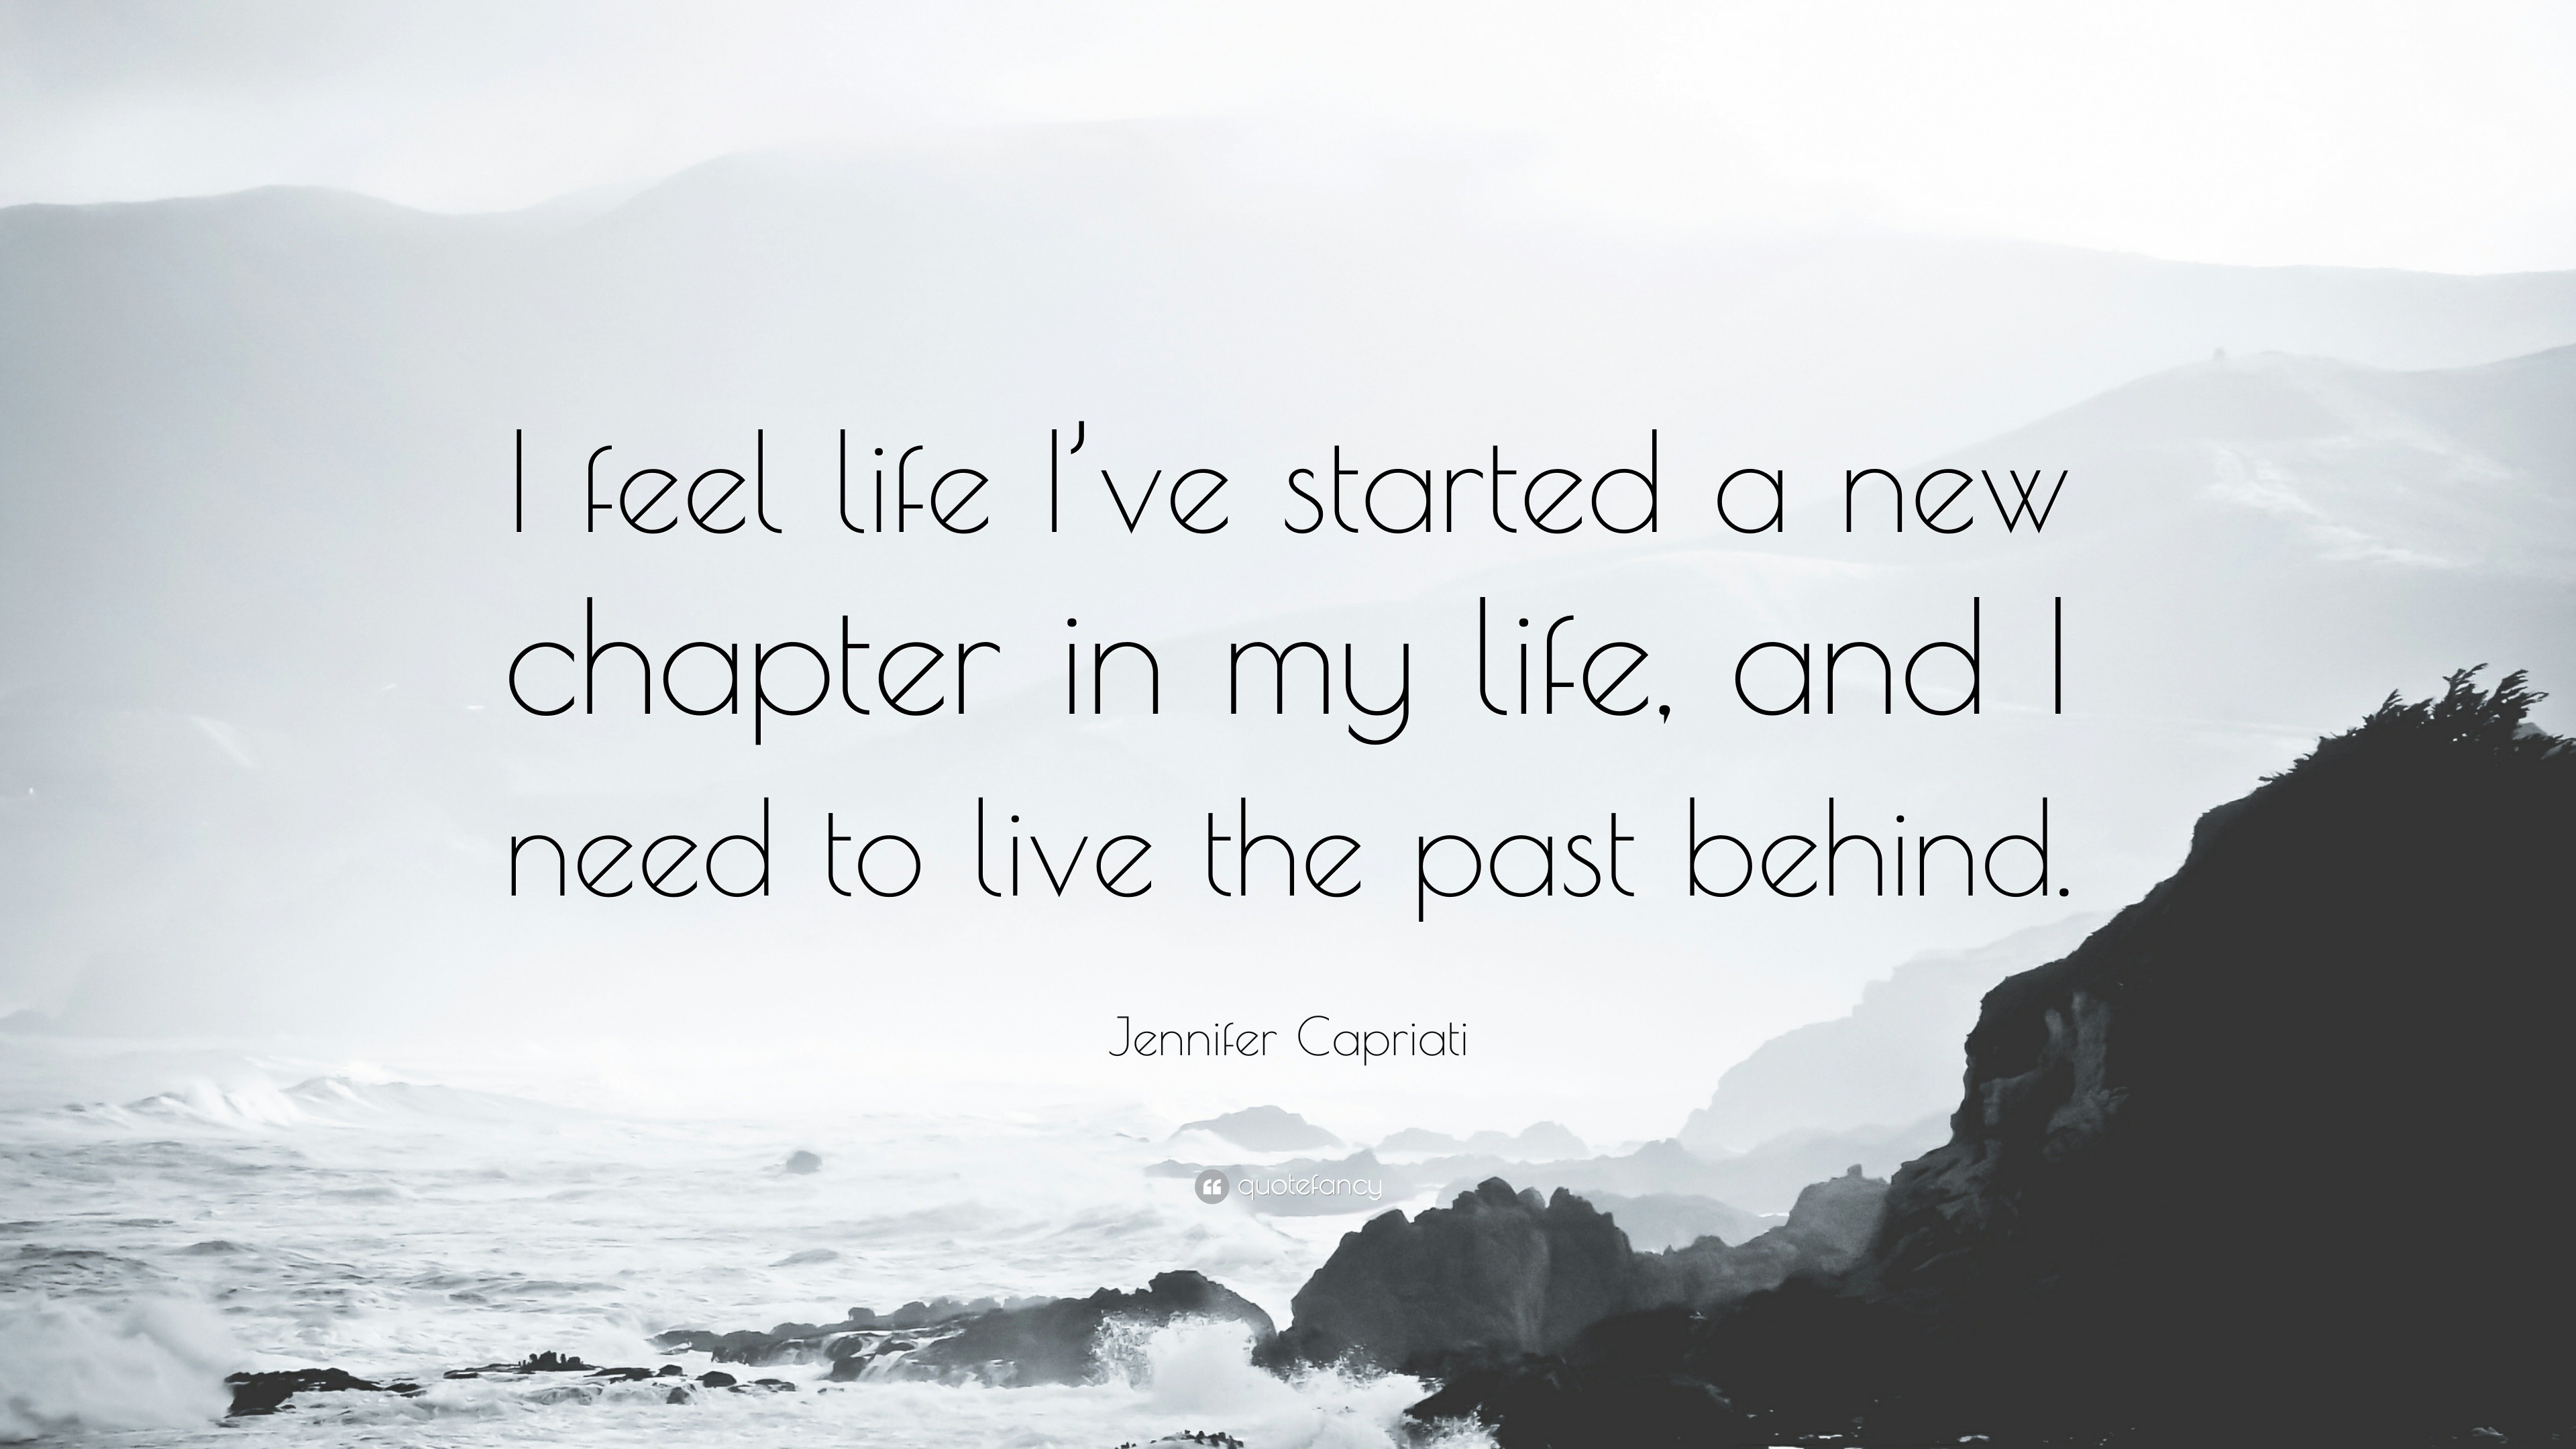 Jennifer Capriati Quote “I feel life I ve started a new chapter in